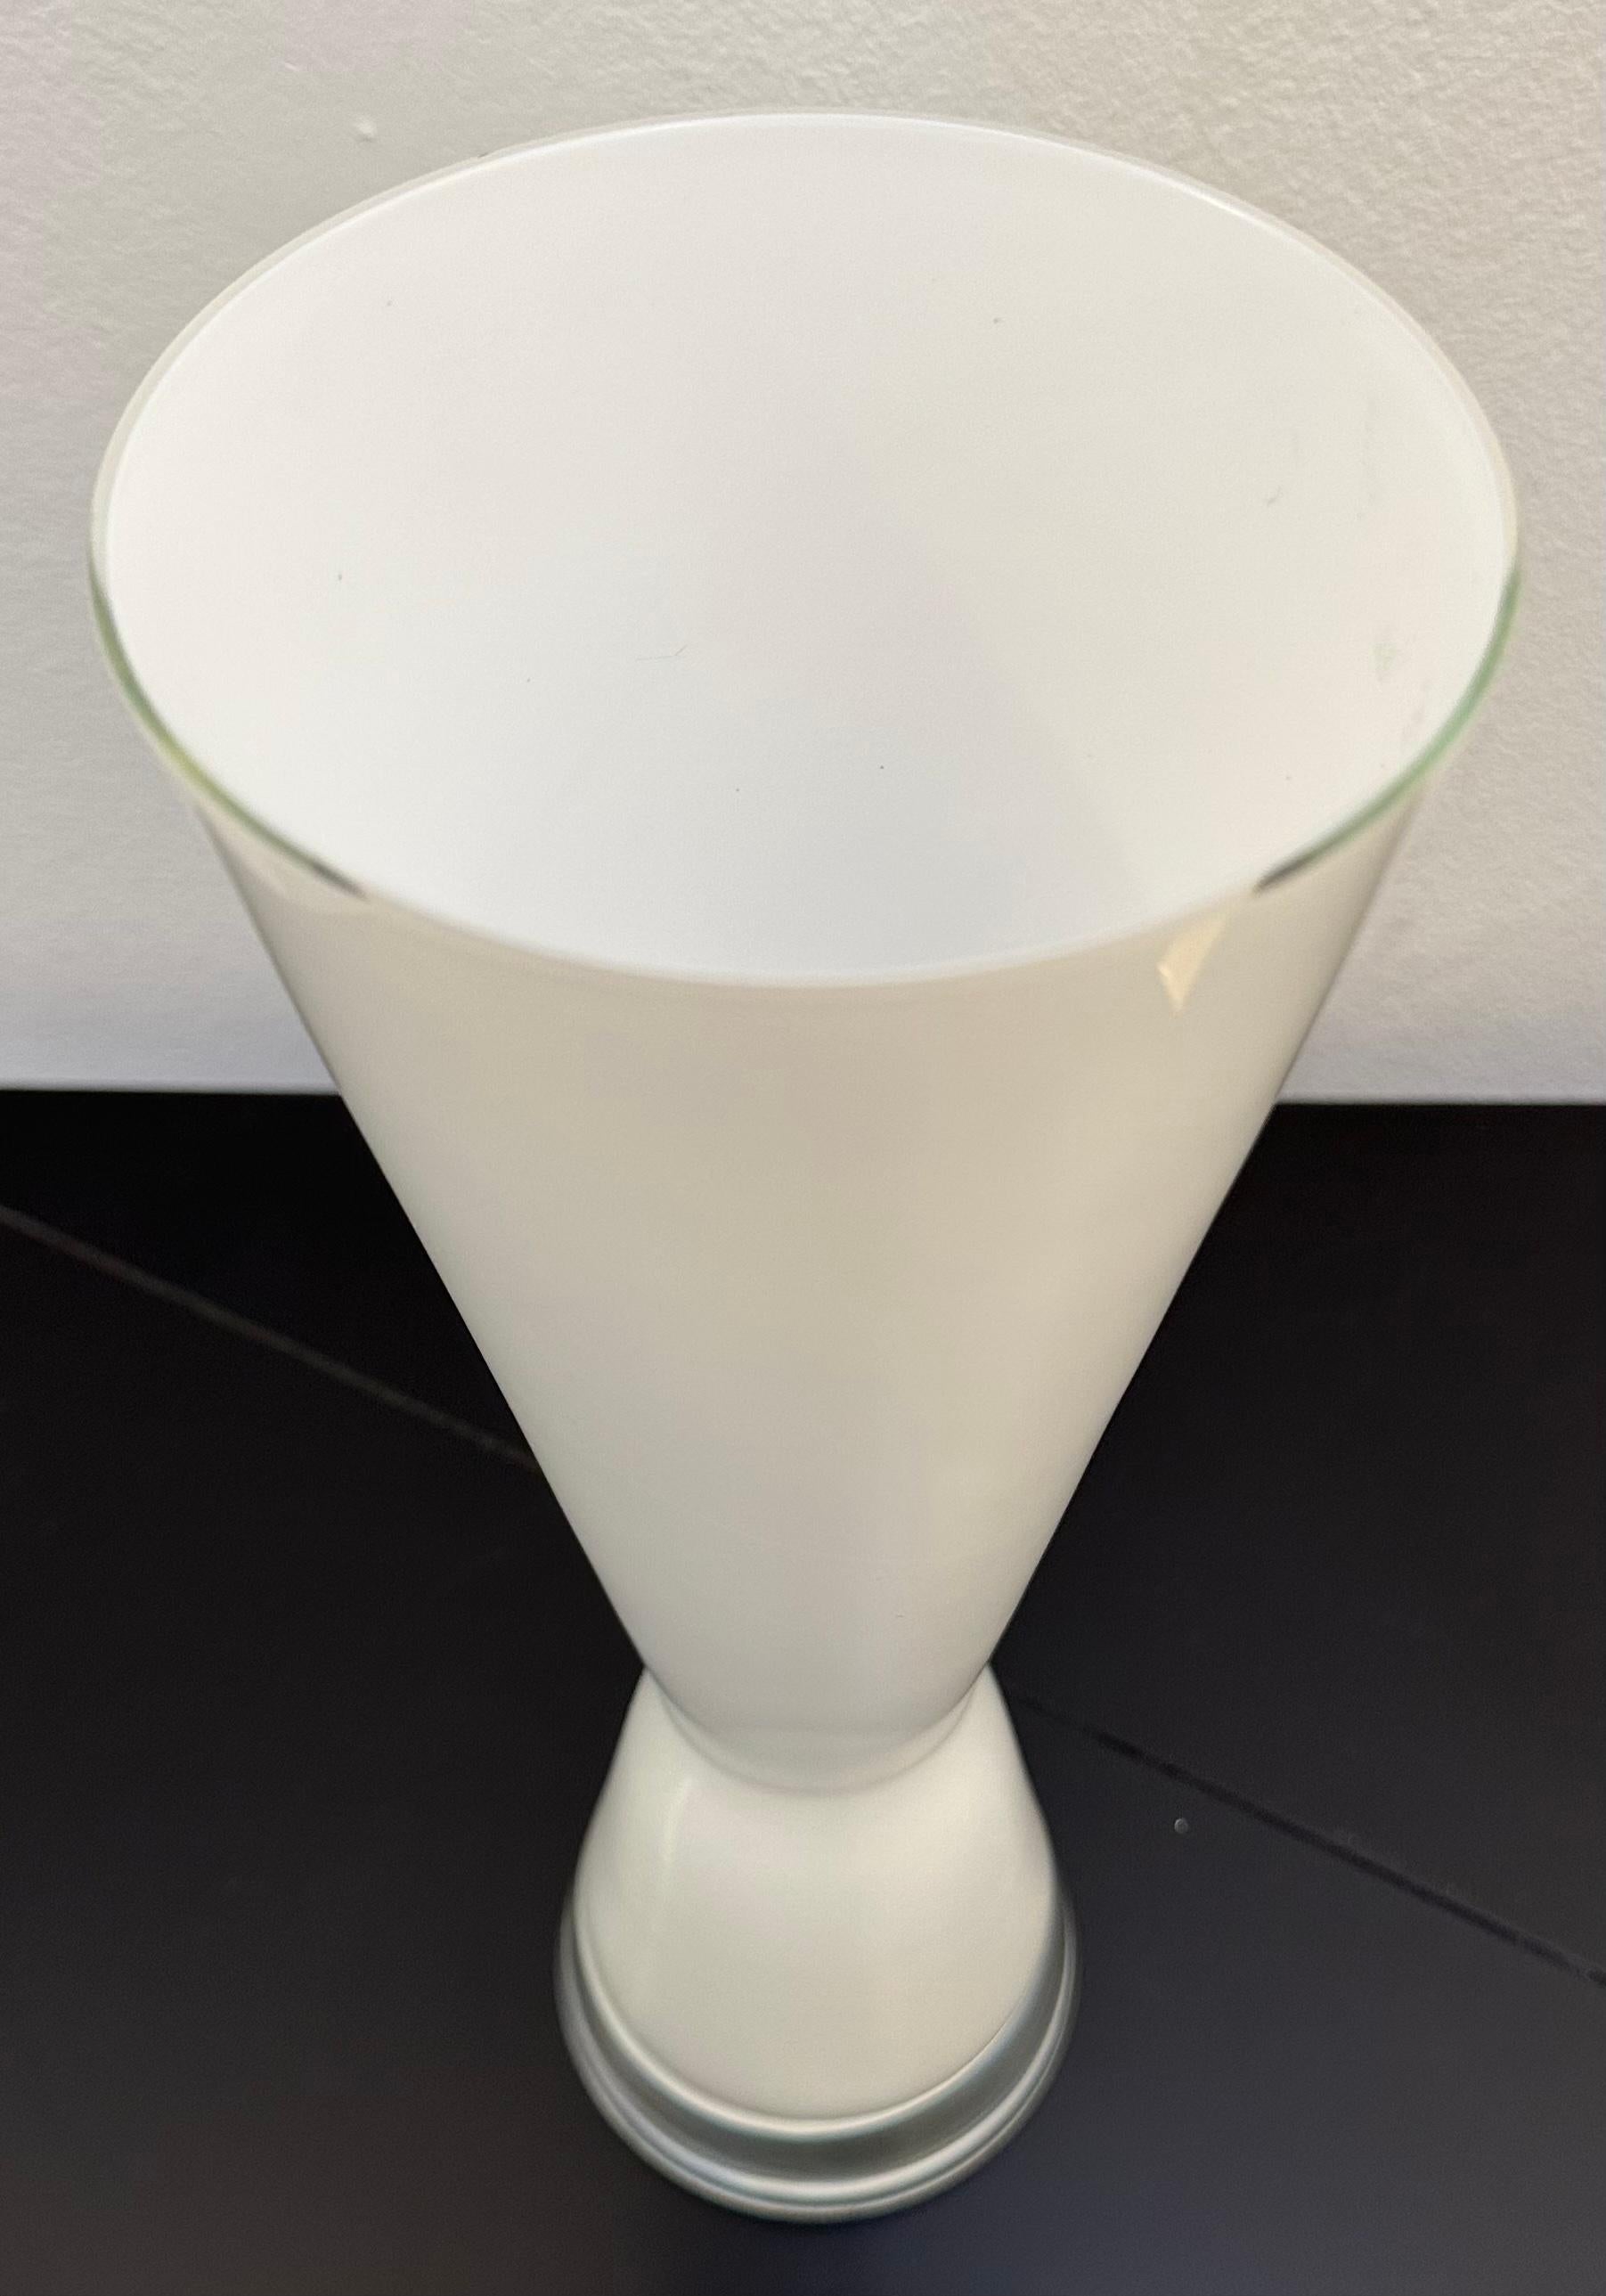 Circa 1960s Milky White & Clear Encased Conical Glass Vase attr. Holmegaard For Sale 6